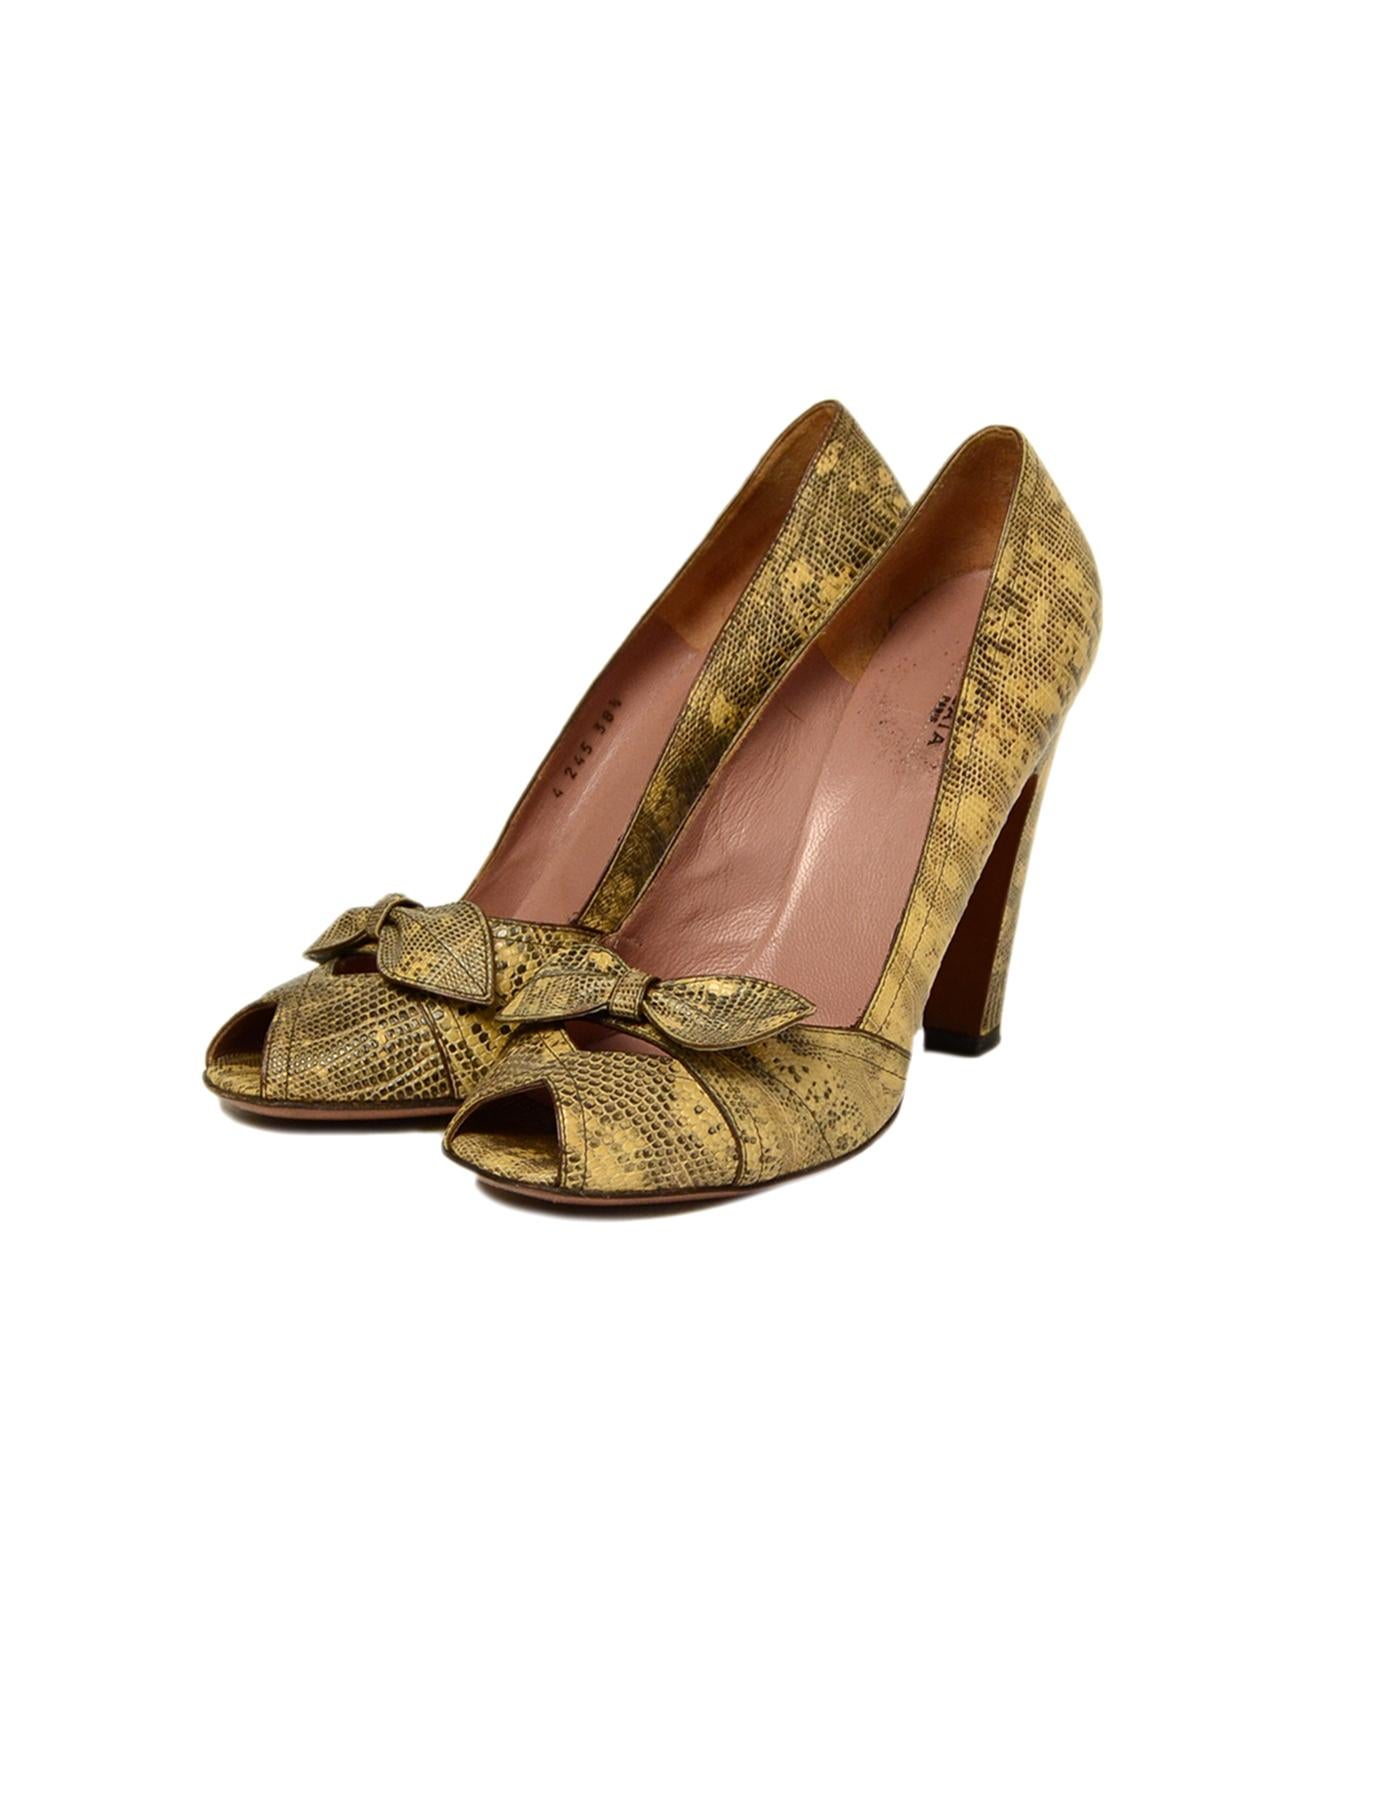 Alaia Beige Lizard Peep Toe Heels w/ Bow sz 38.5

Made In: Italy
Color: Beige
Materials: Lizard skin
Closure/Opening: Slide on
Overall Condition: Very good pre-owned condition, with light scratches to front, moderate wear to insoles and light wear